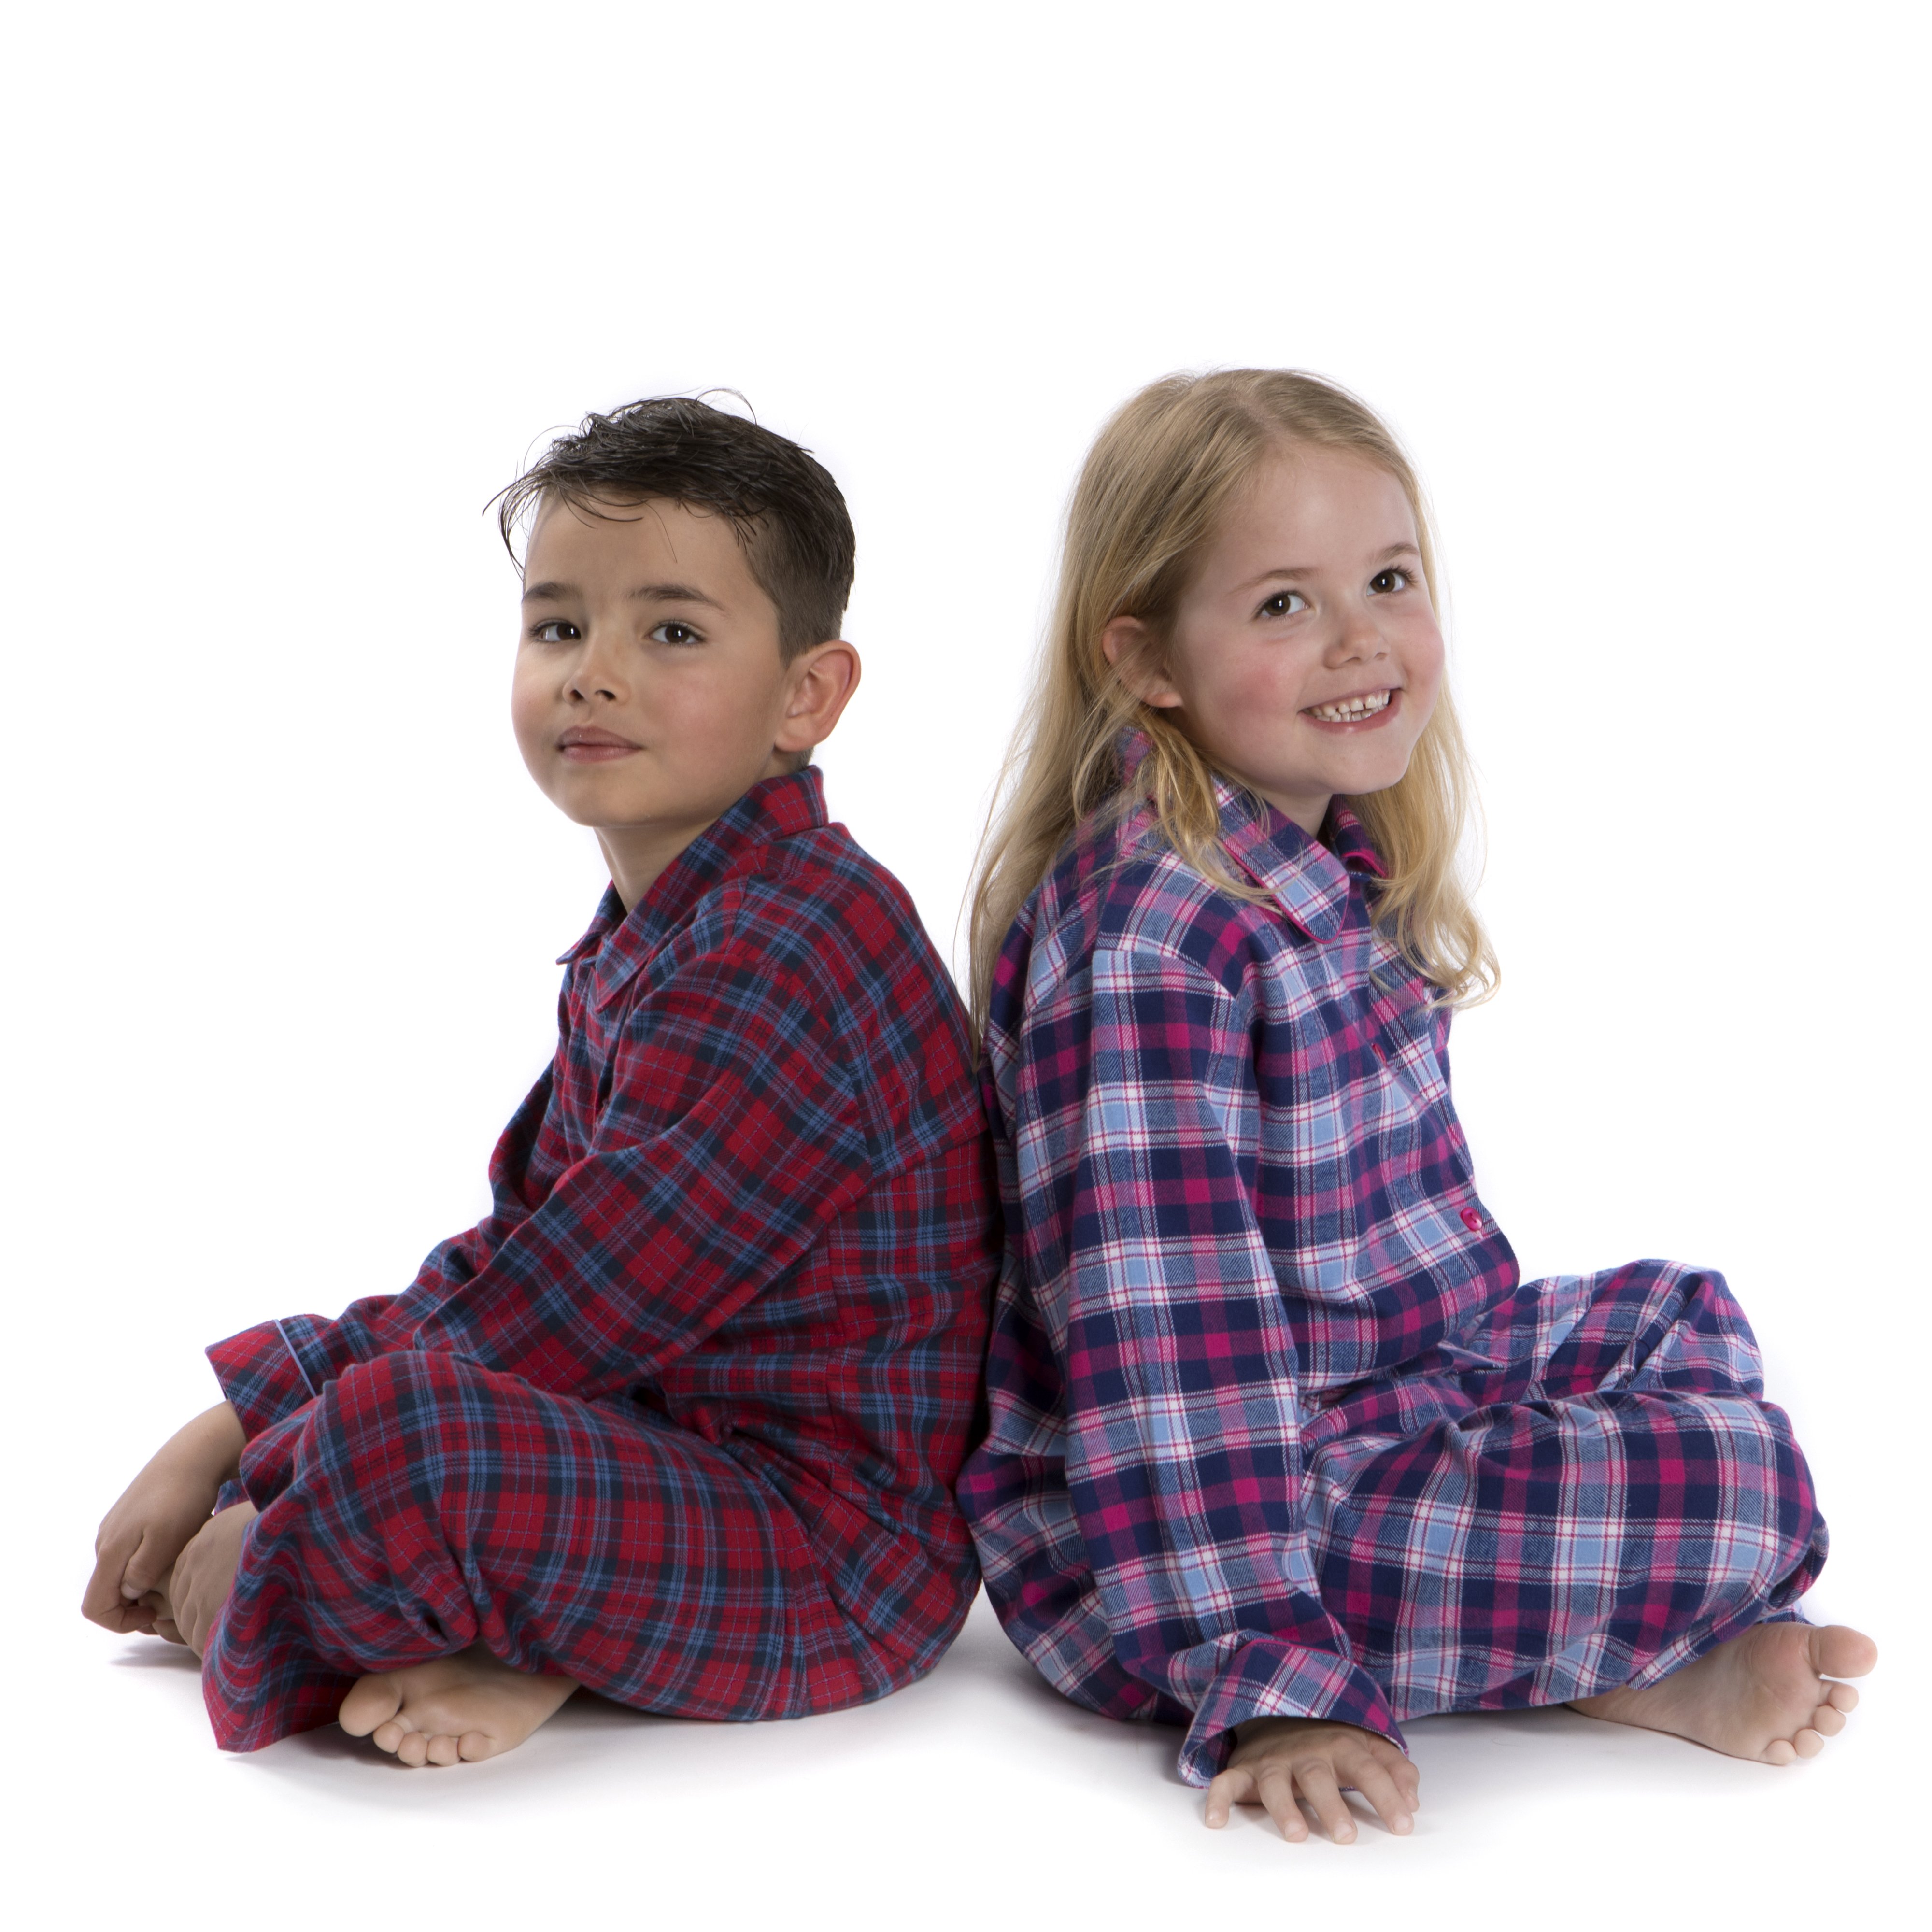 Another pair of twins take centre stage at The Pyjama House